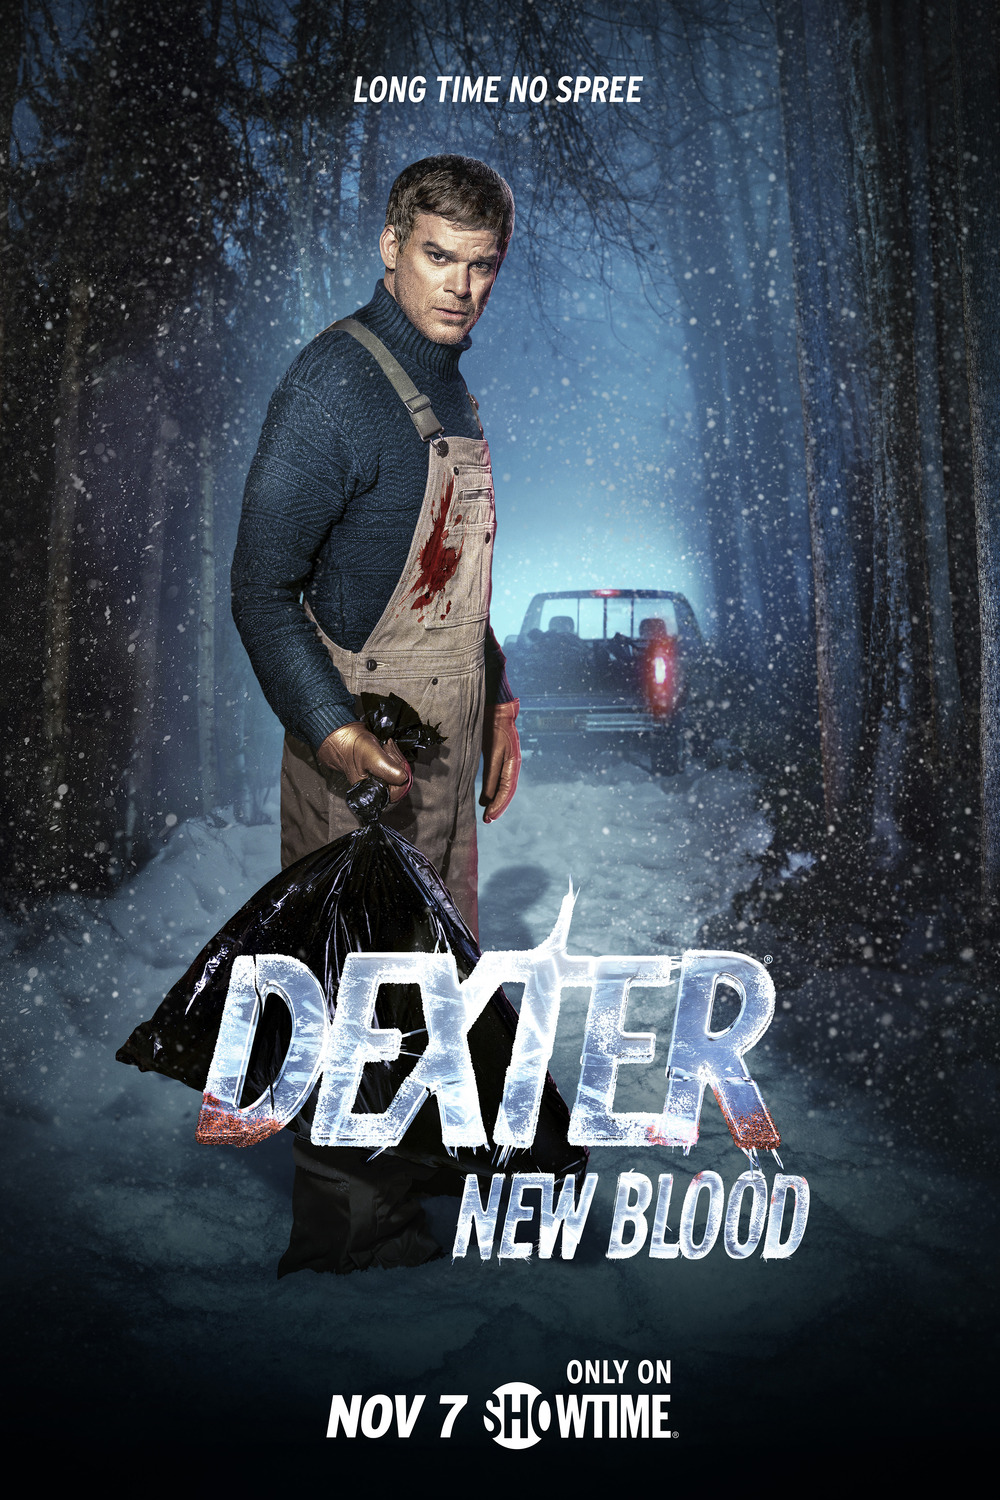 Extra Large TV Poster Image for Dexter: New Blood (#2 of 2)